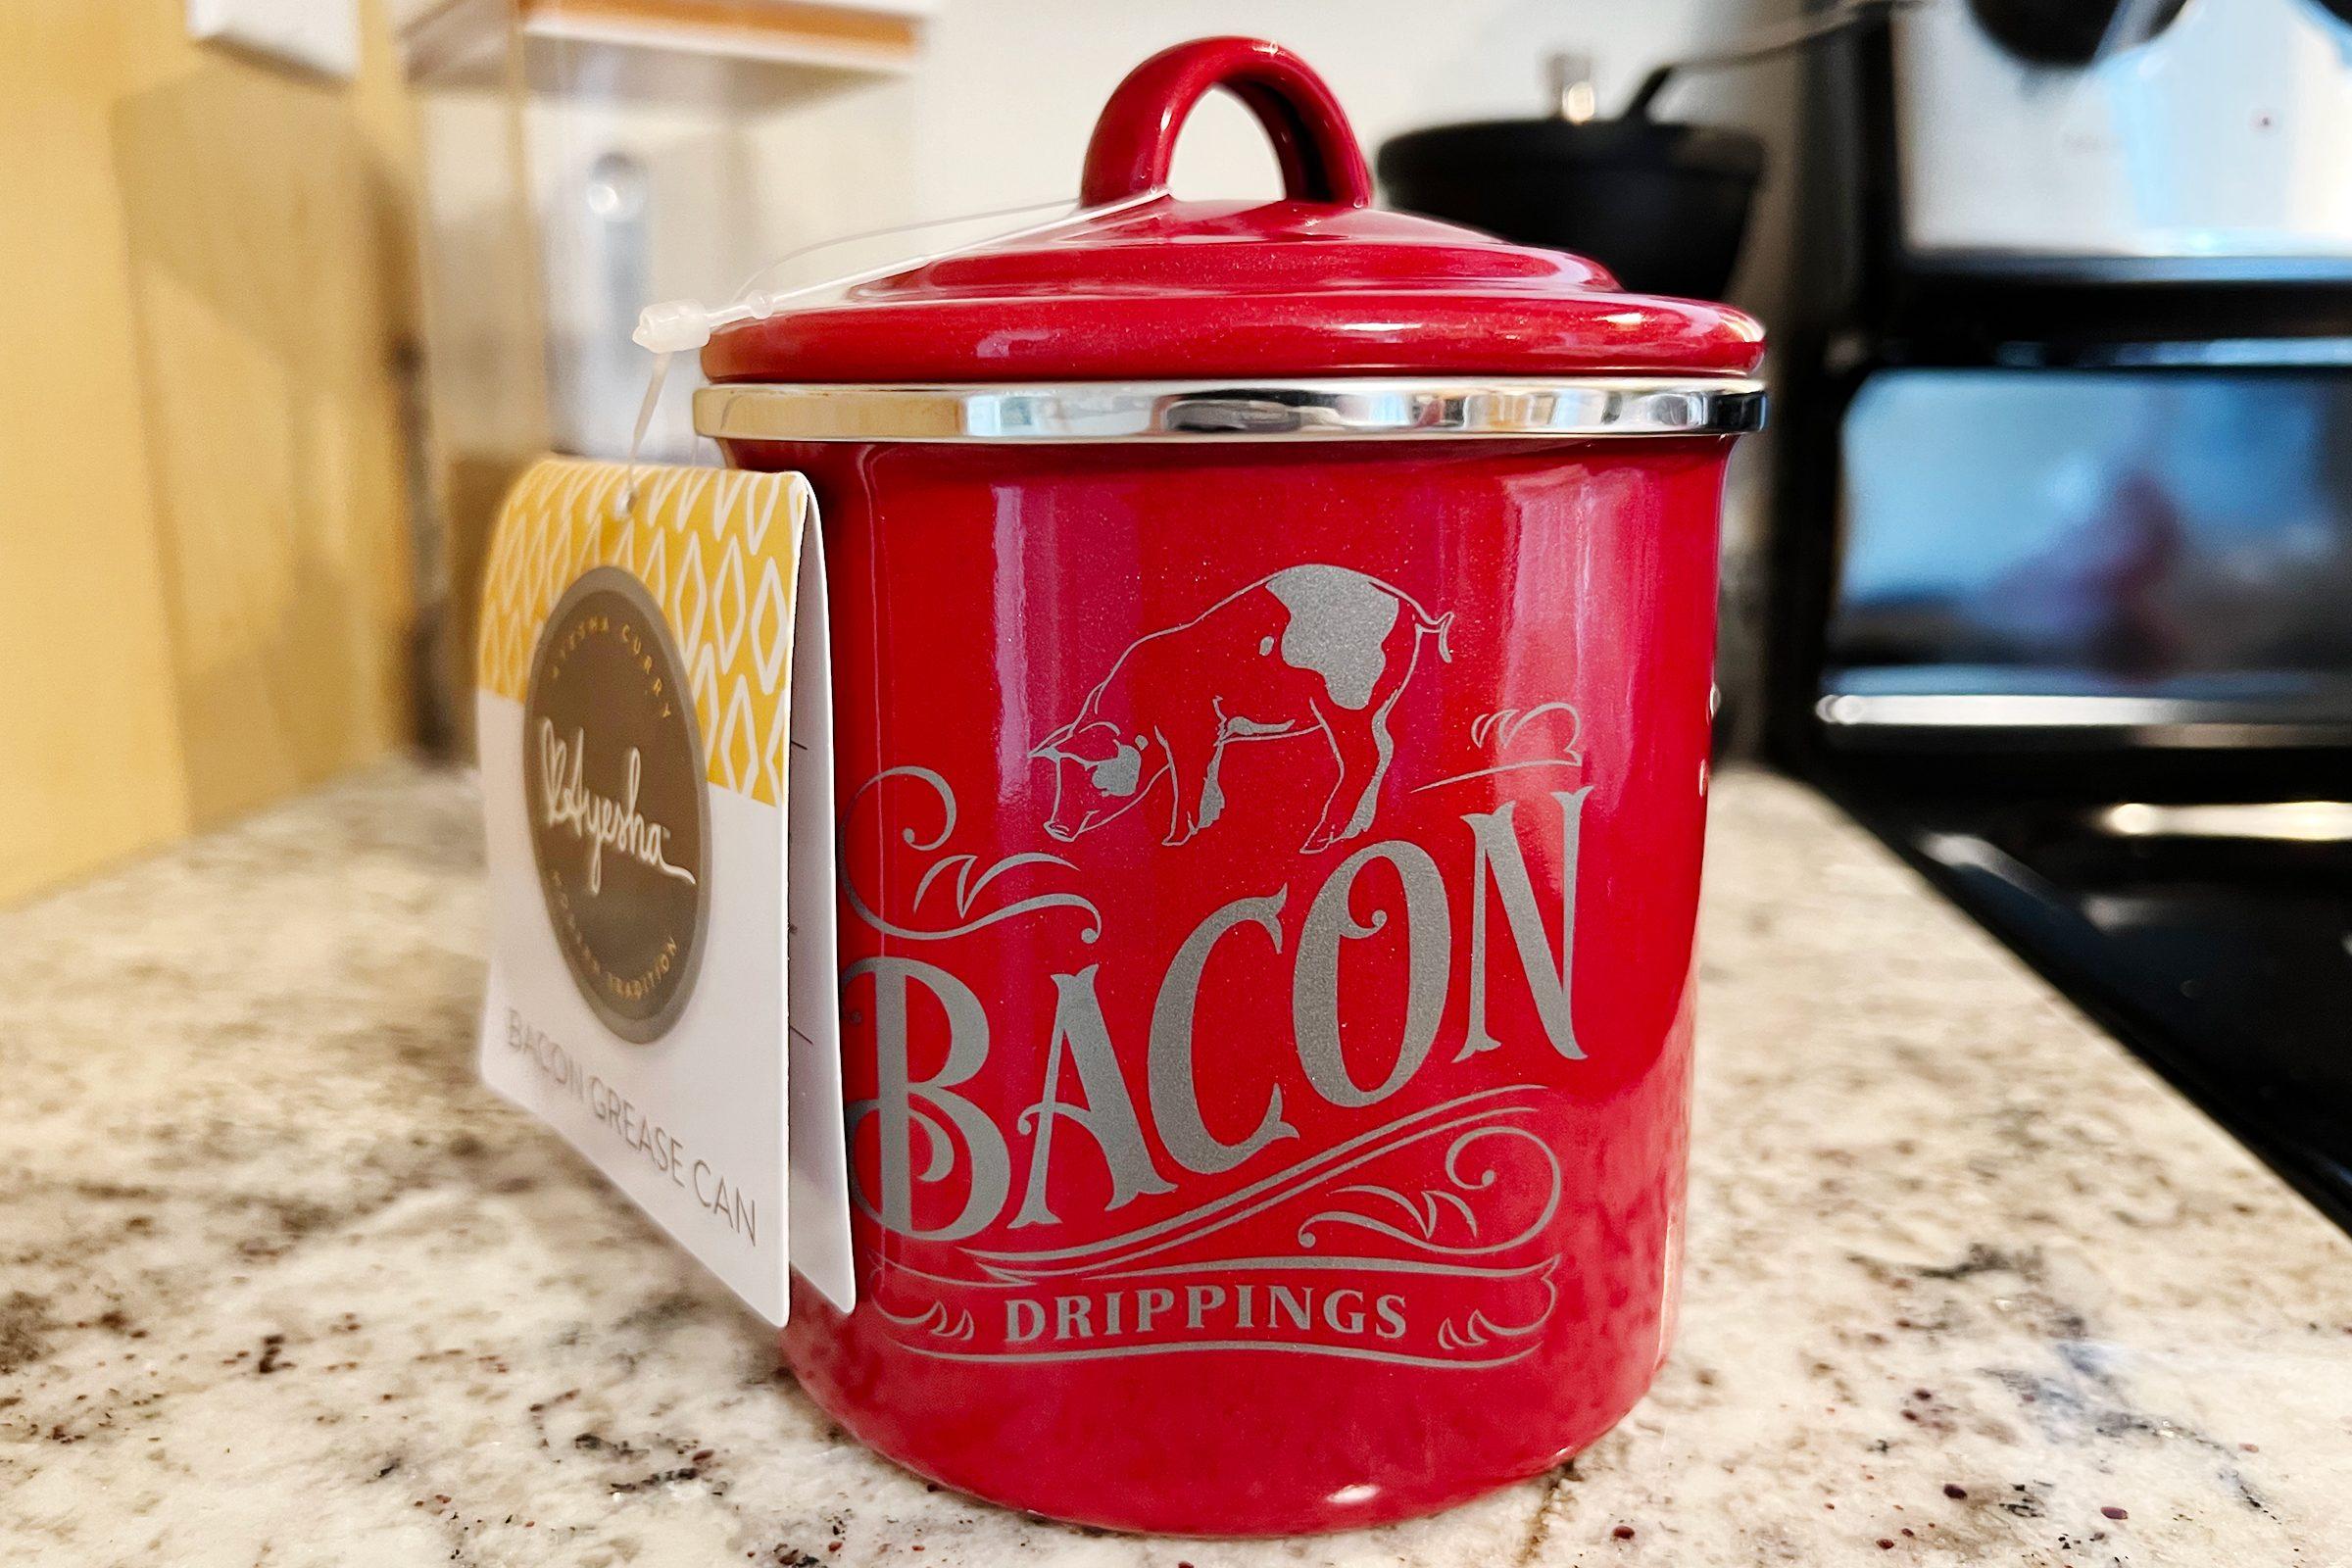 https://www.tasteofhome.com/wp-content/uploads/2021/12/IMG_004076-bacon-grease-container.jpg?fit=700%2C1024